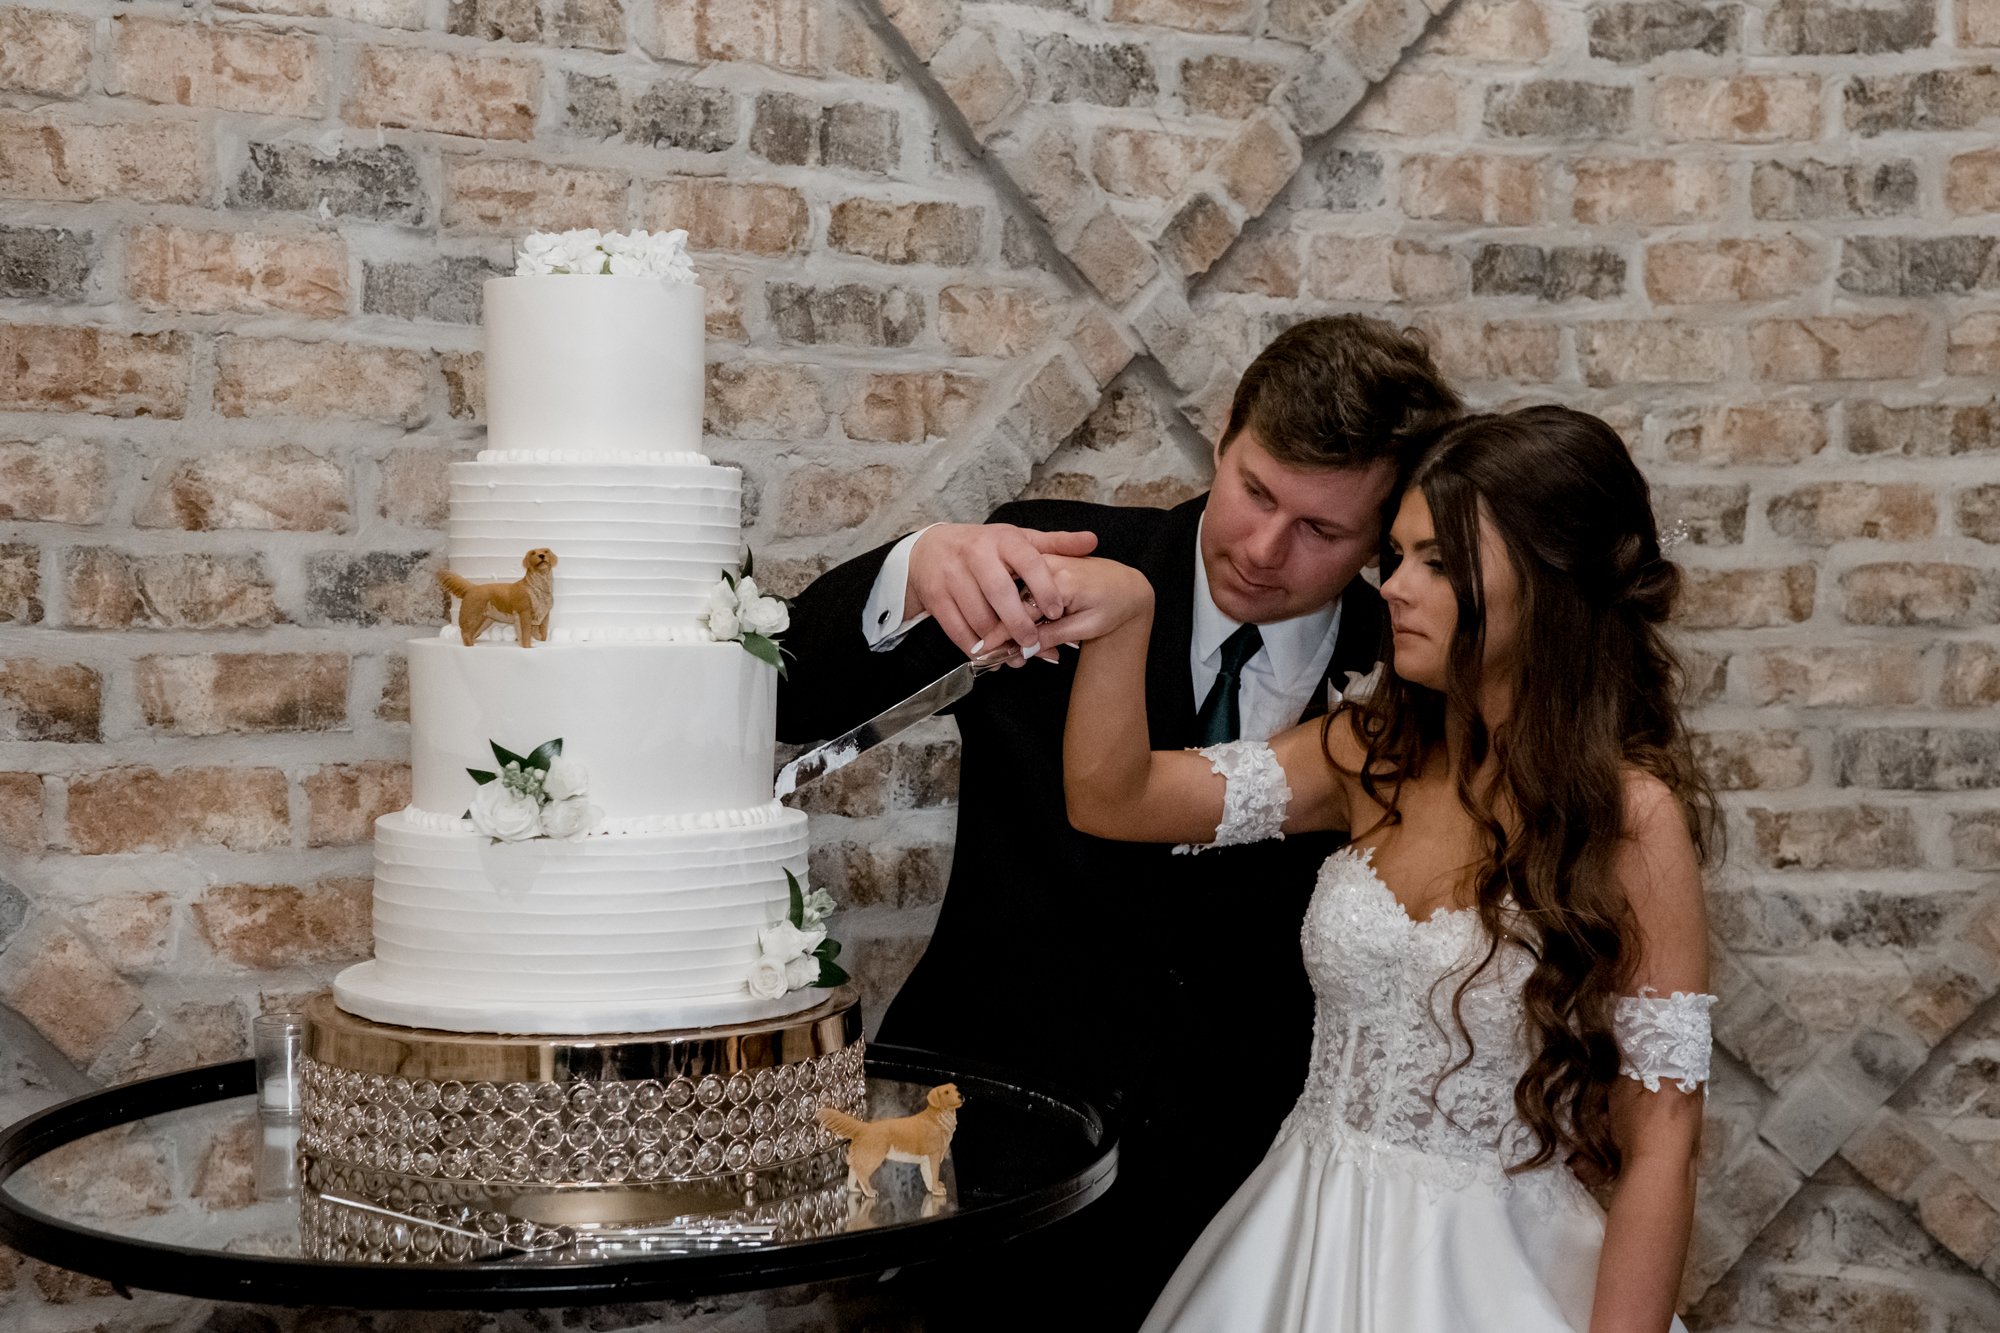 Bride and groom cake cutting. Wedding at Iron Manor (Montg omery, TX)